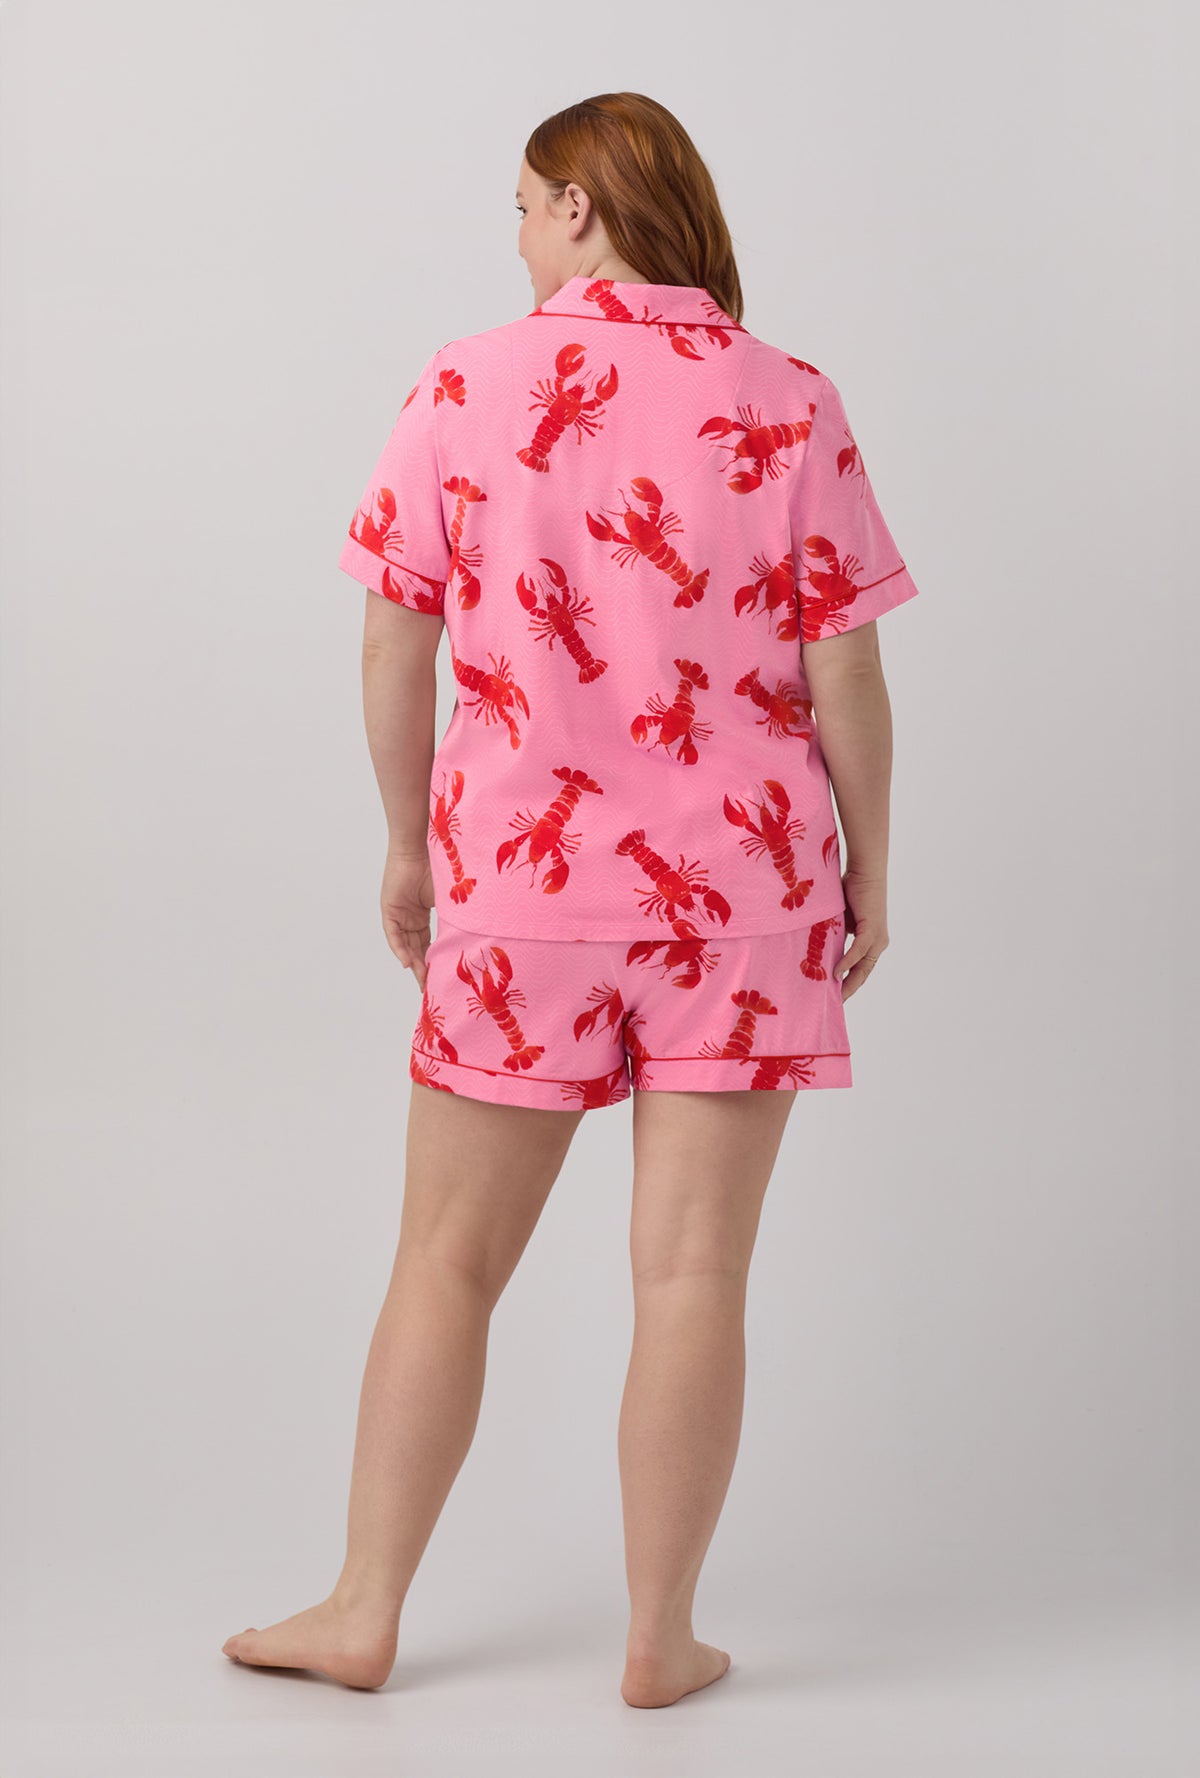 A lady wearing plus size pink  Short Sleeve Classic Shorty Stretch Jersey plus size PJ Set with Lobster Fest print.